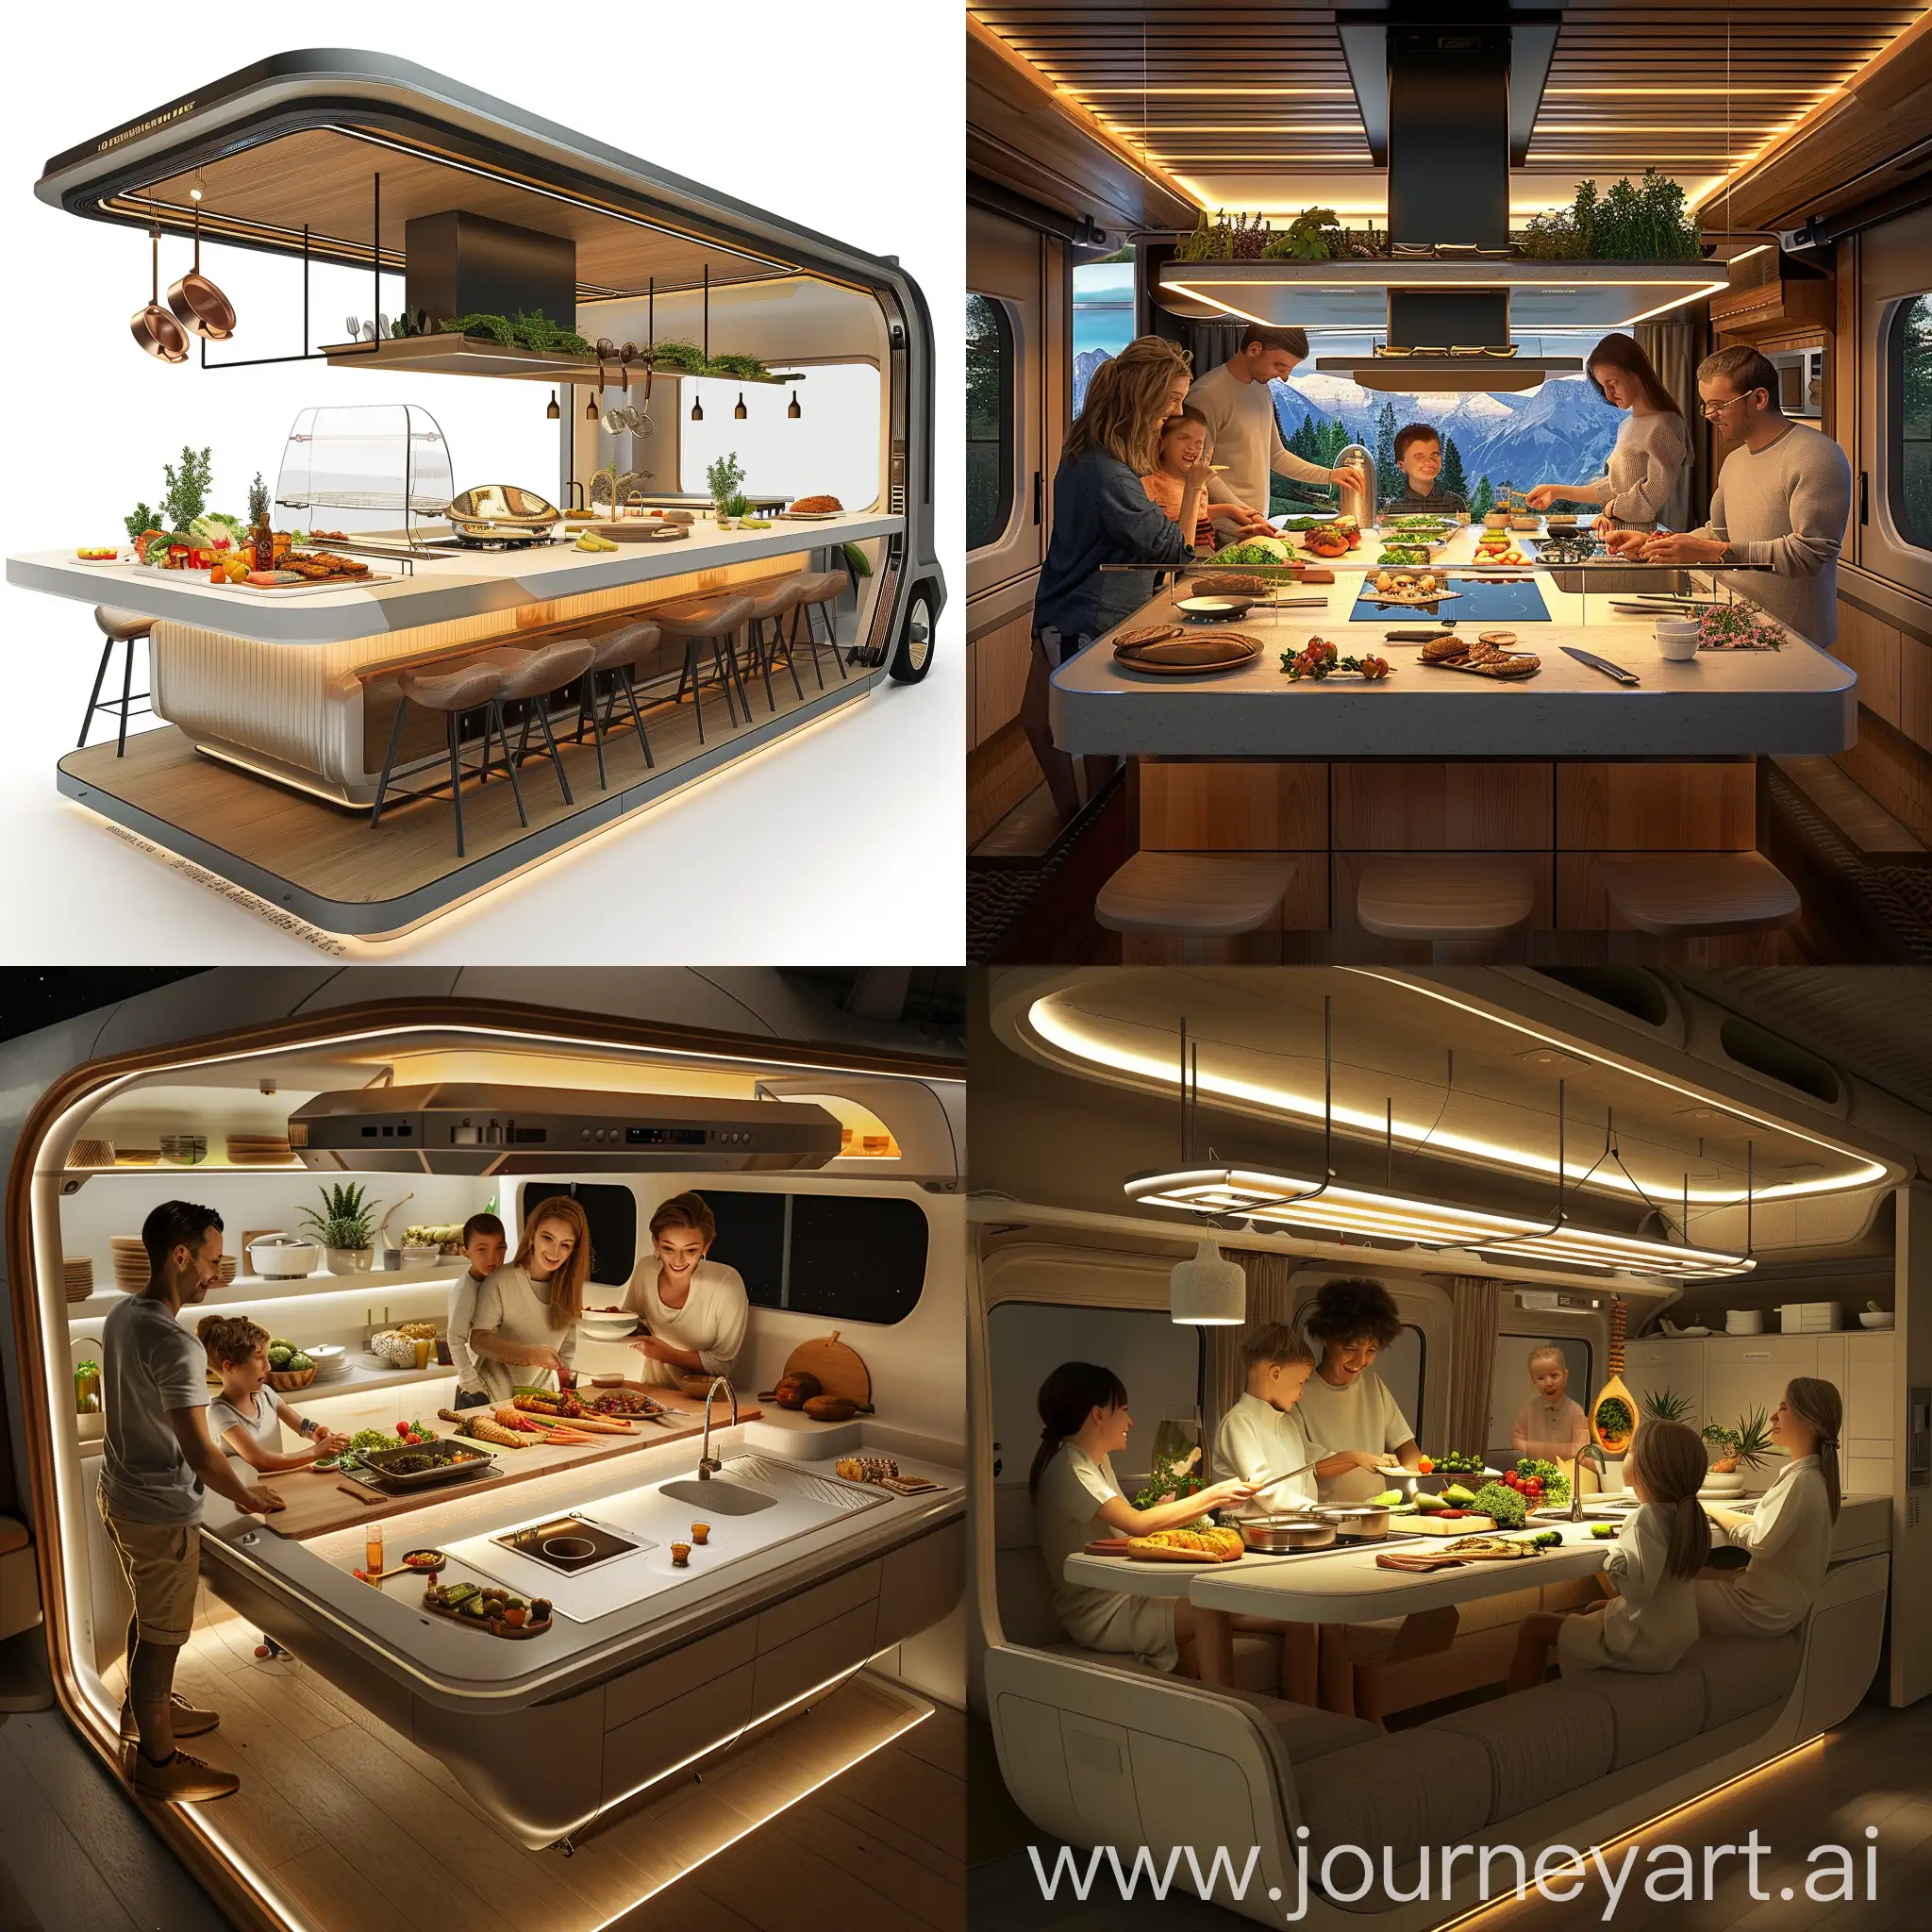 You are tasked with designing a mobile kitchen for a family who travels frequently and seeks to maintain a close connection with nature while preparing healthy and delicious meals during their journeys. Your challenge is to create an innovative design that incorporates biophilic design elements, organic materials, and a cozy ambiance inspired by Italian coastal kitchens. The kitchen should include a central island that comfortably accommodates five people, complete with an integrated sink and an induction cooktop, along with a suspended hood to eliminate vapors and odors. You also need to develop a lighting system that conveys a sense of warmth and serenity while complementing the Italian coastal-inspired style. Be creative and think of practical, functional solutions to meet the needs of this family on their culinary adventures around the world.